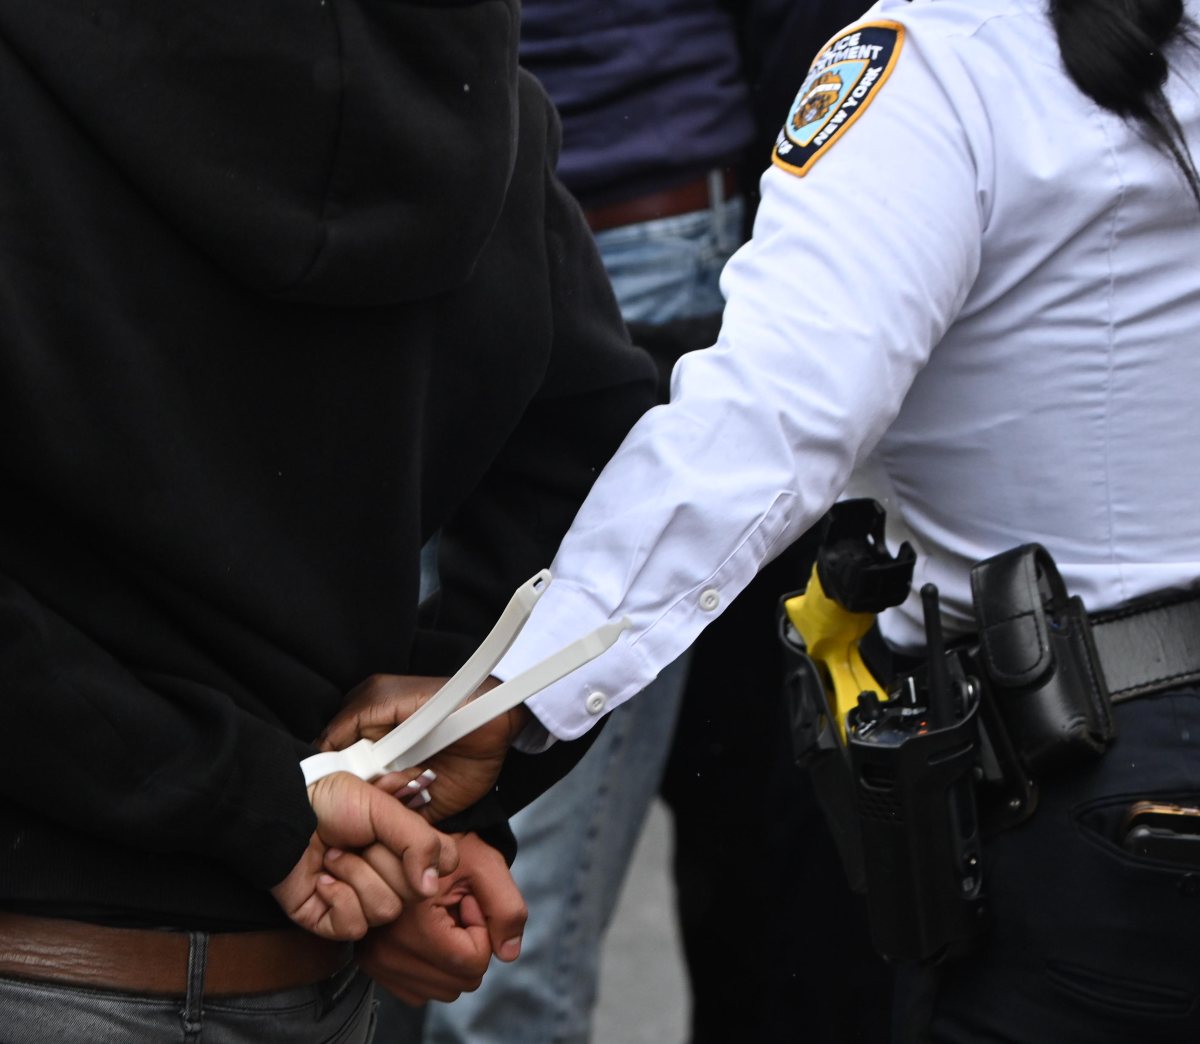 Demonstrator arrested at Brooklyn protest